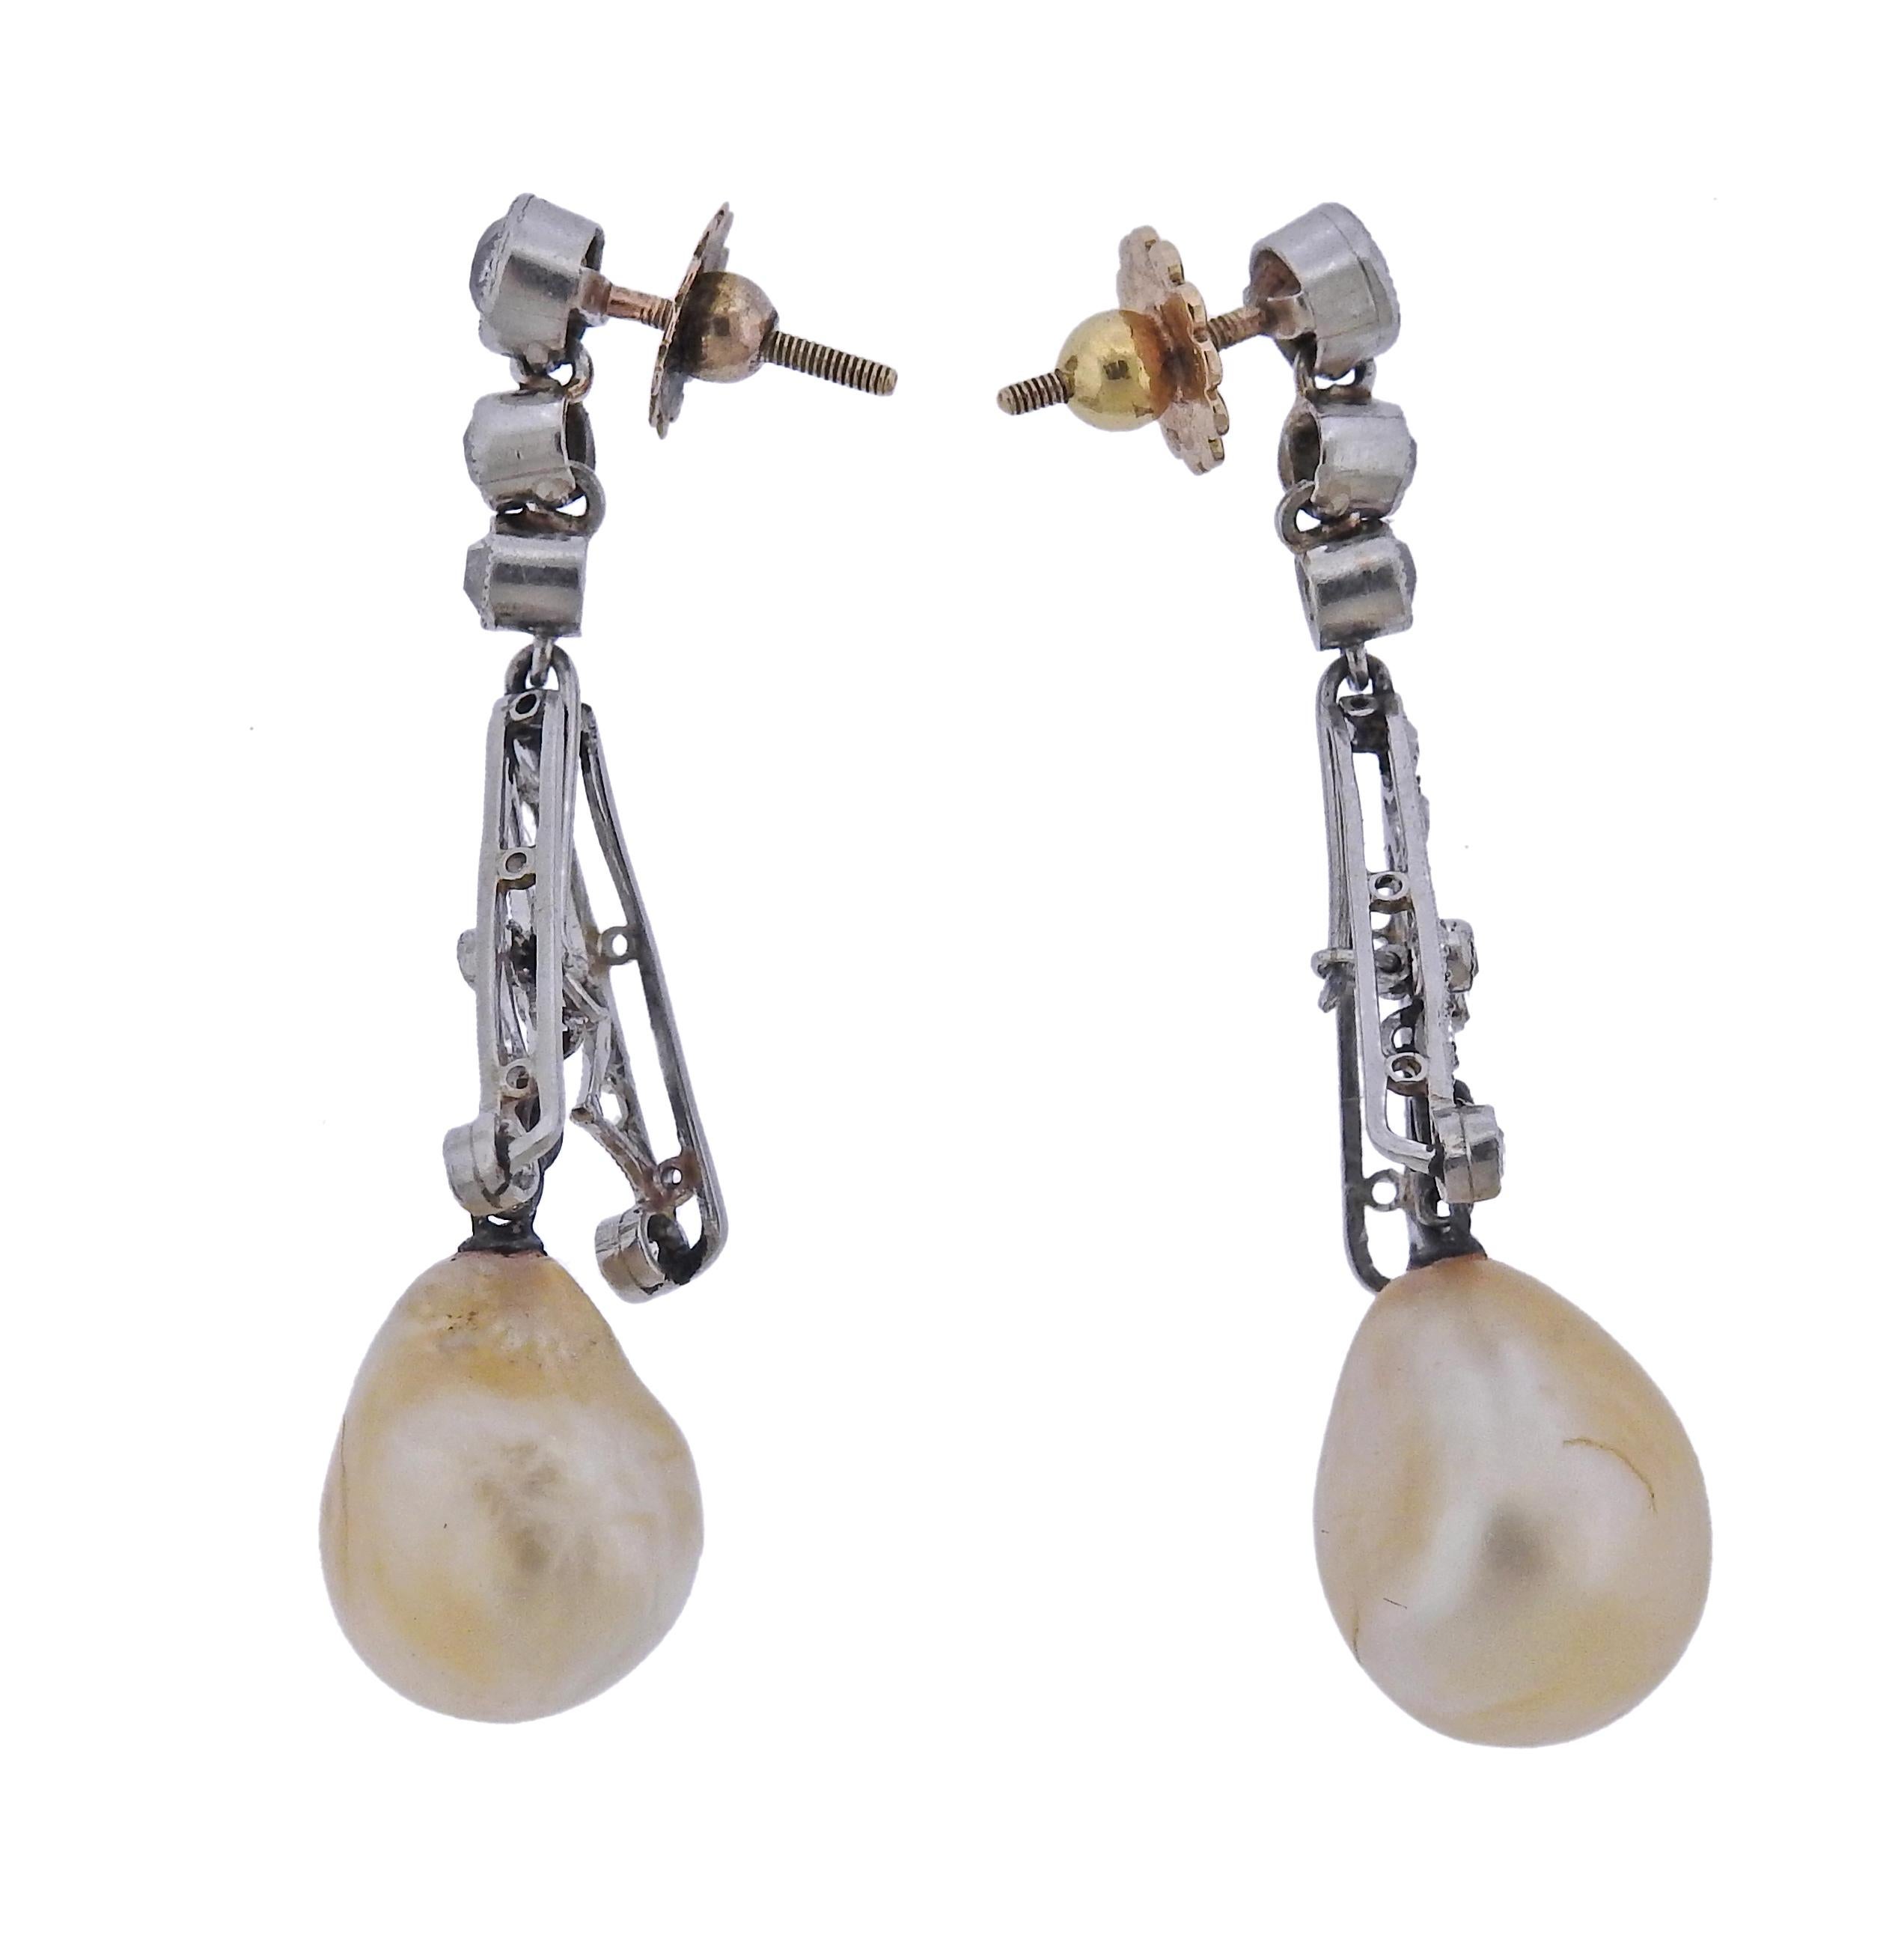 Art Deco platinum and gold posts/back earrings, with two natural pearls, measuring approx. 12.6 x 10mm and 13.3 x 10.9mm. Surrounded with rose and old mine cut diamonds. Earrings are 44mm long. Weight - 8.7 grams.